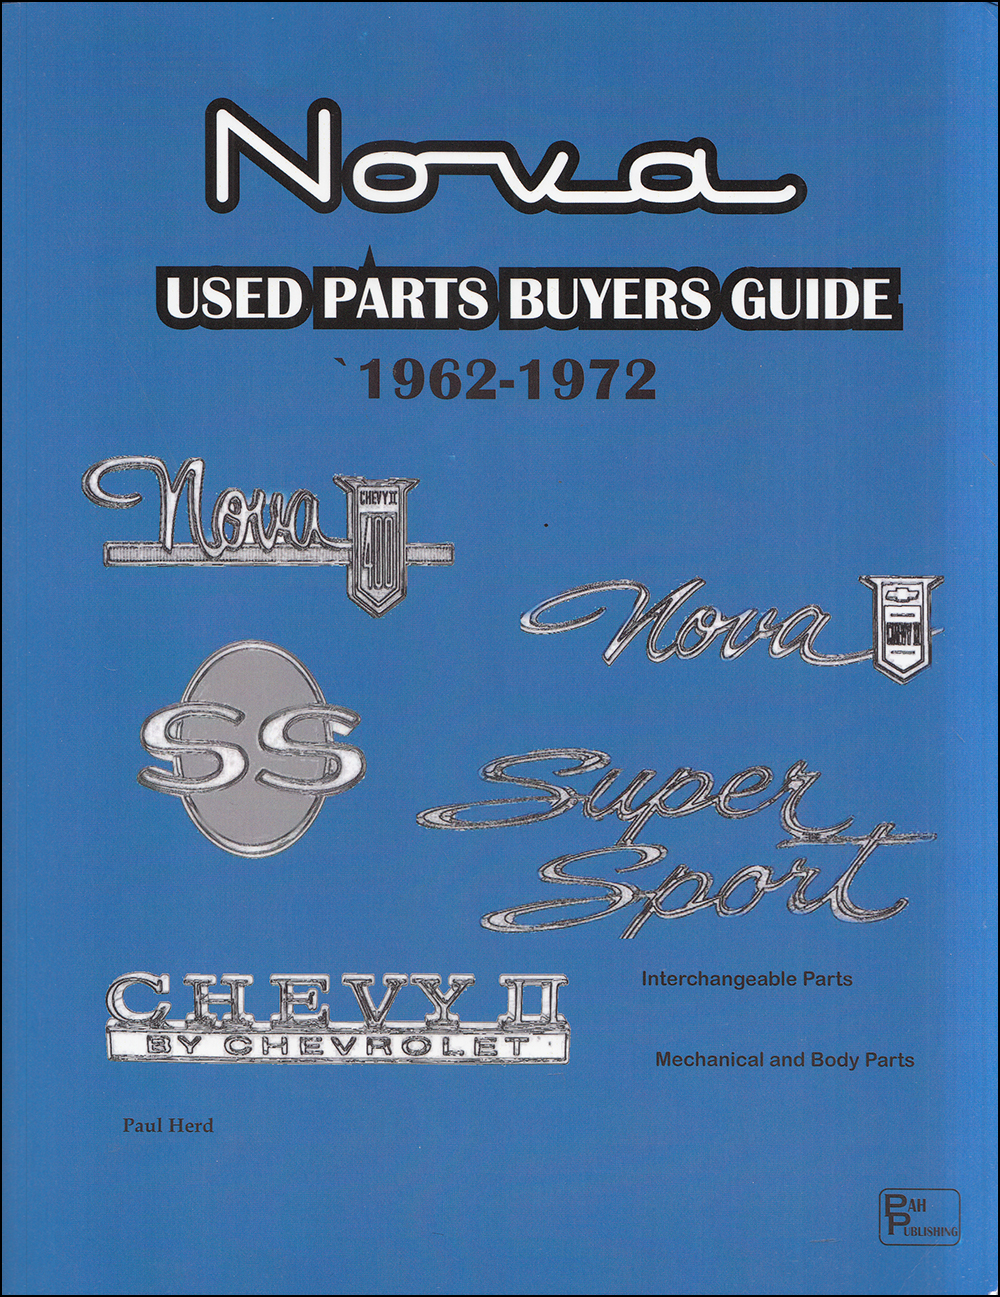 1962-1972 Chevrolet Nova Used Parts Buyers Guide and Interchange Manual